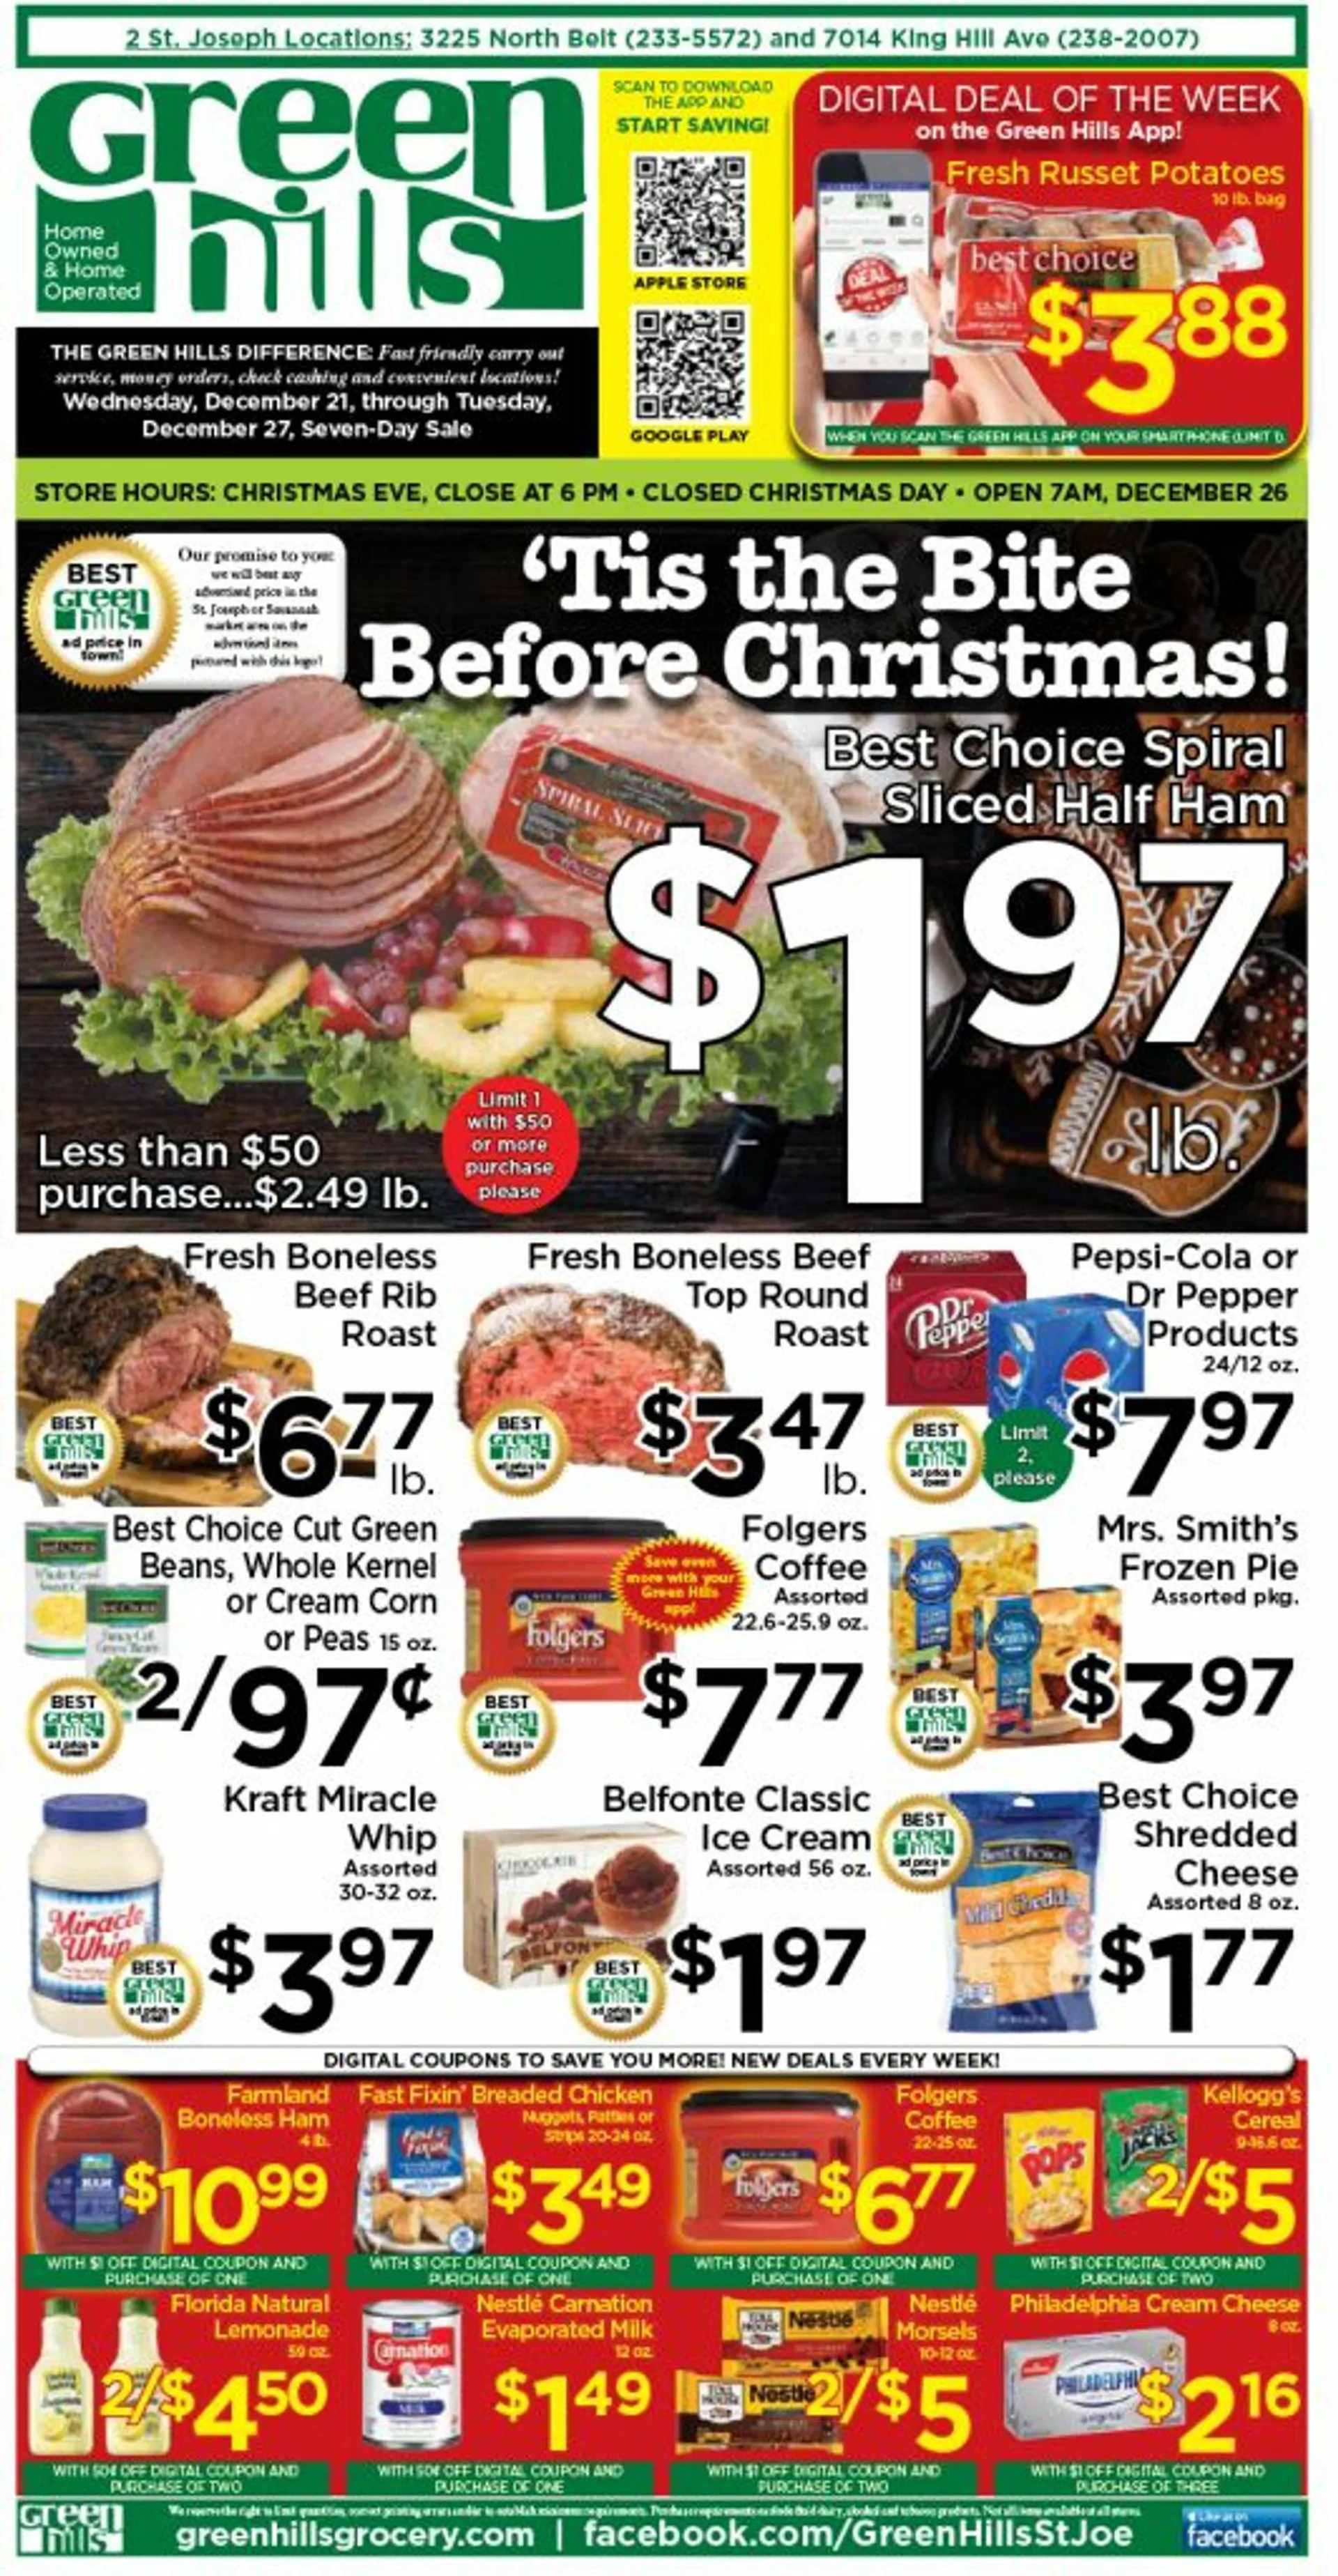 Green Hills Grocery Current weekly ad - 1